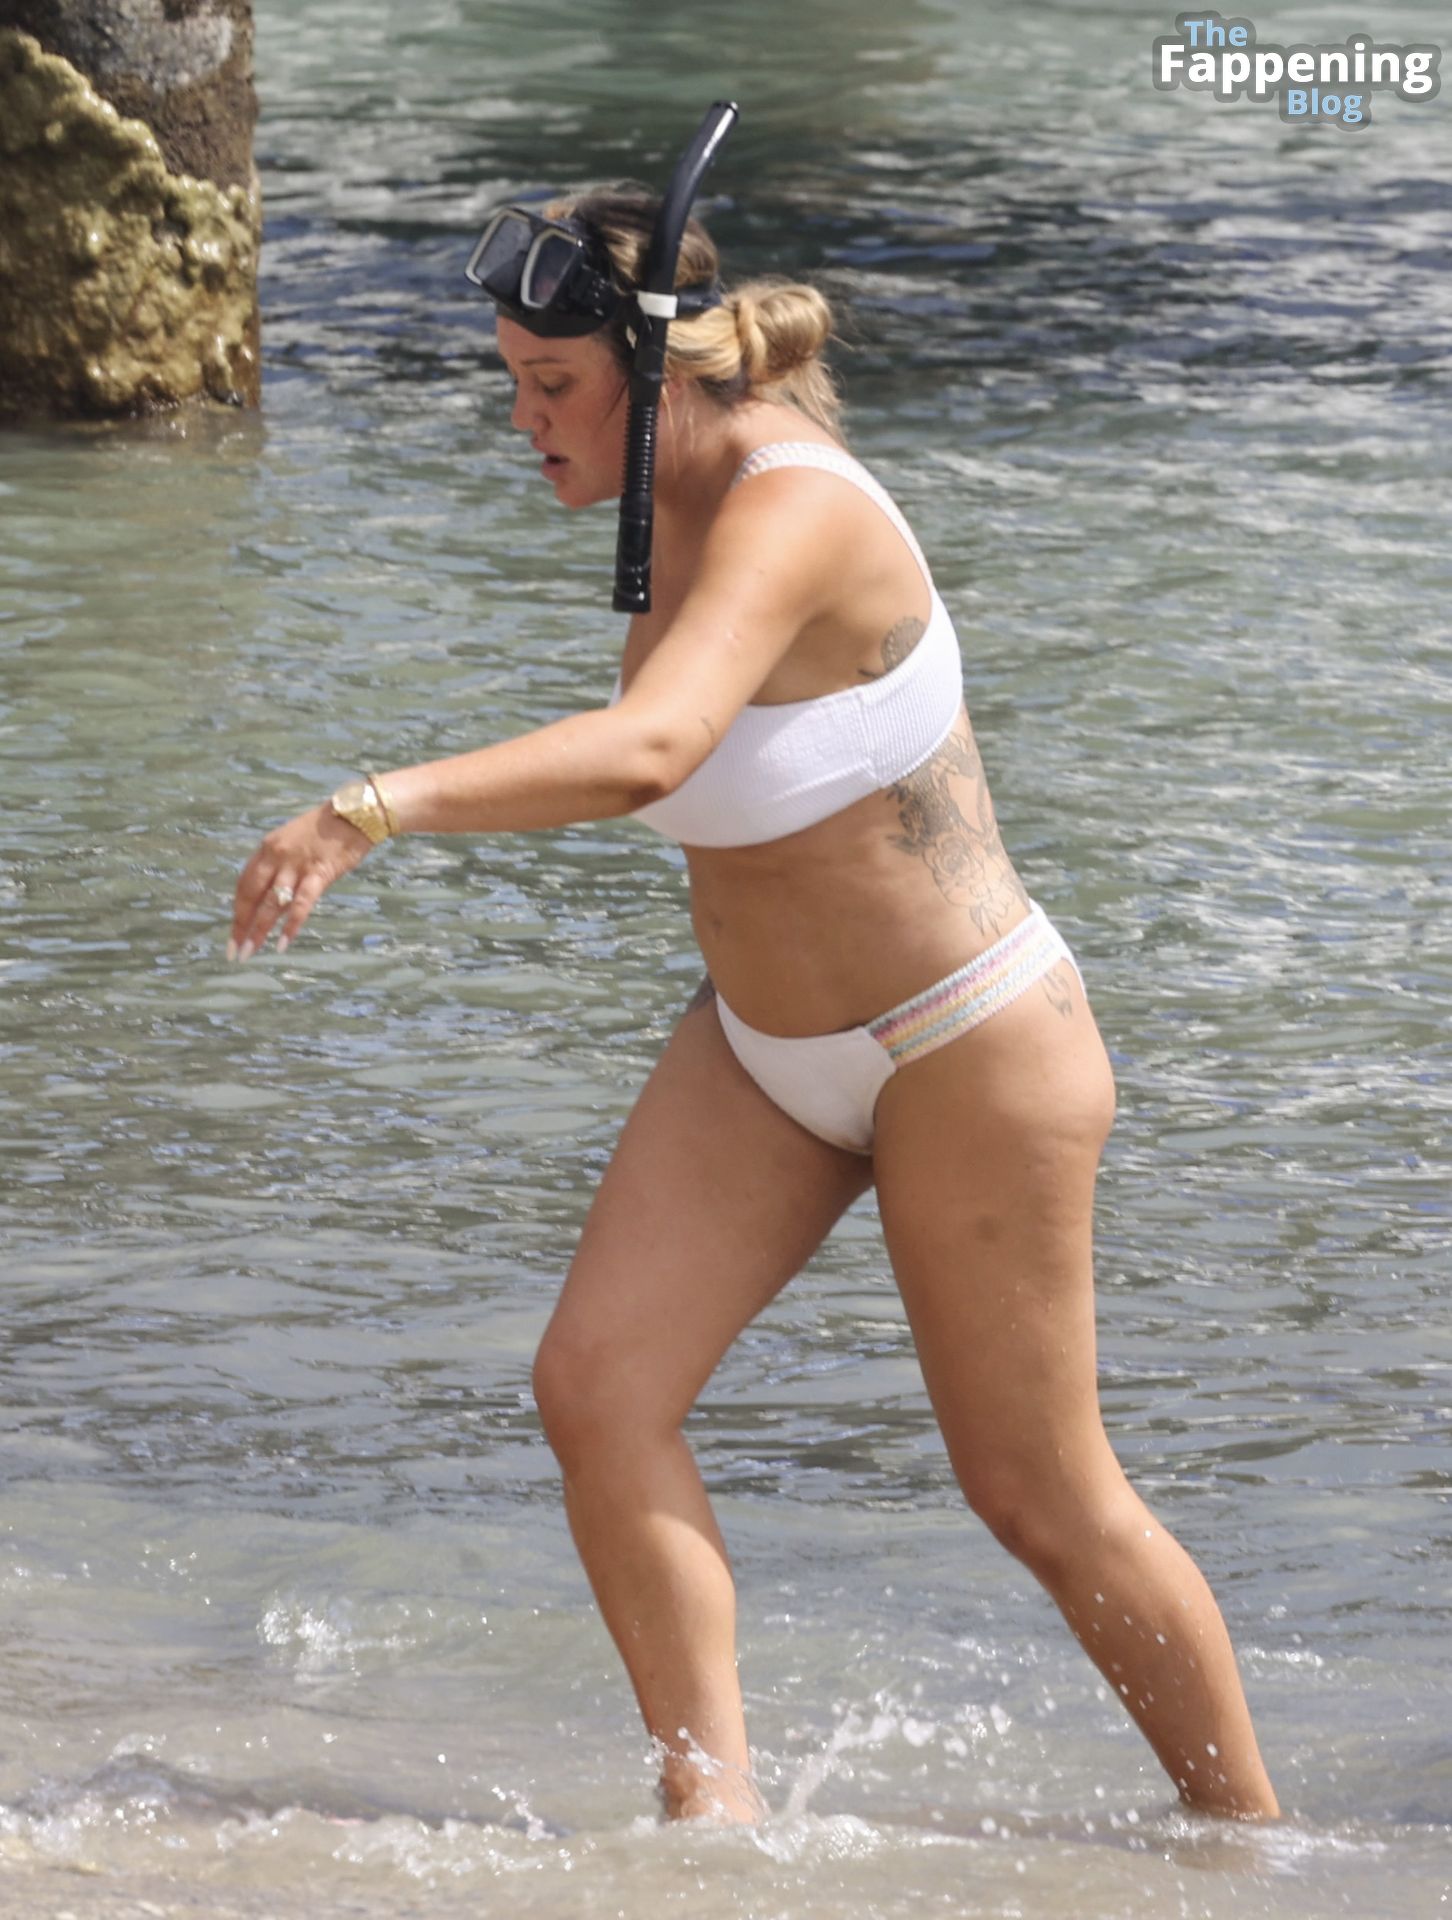 Charlotte-Crosby-Sexy-2-The-Fappening-Blog.jpg